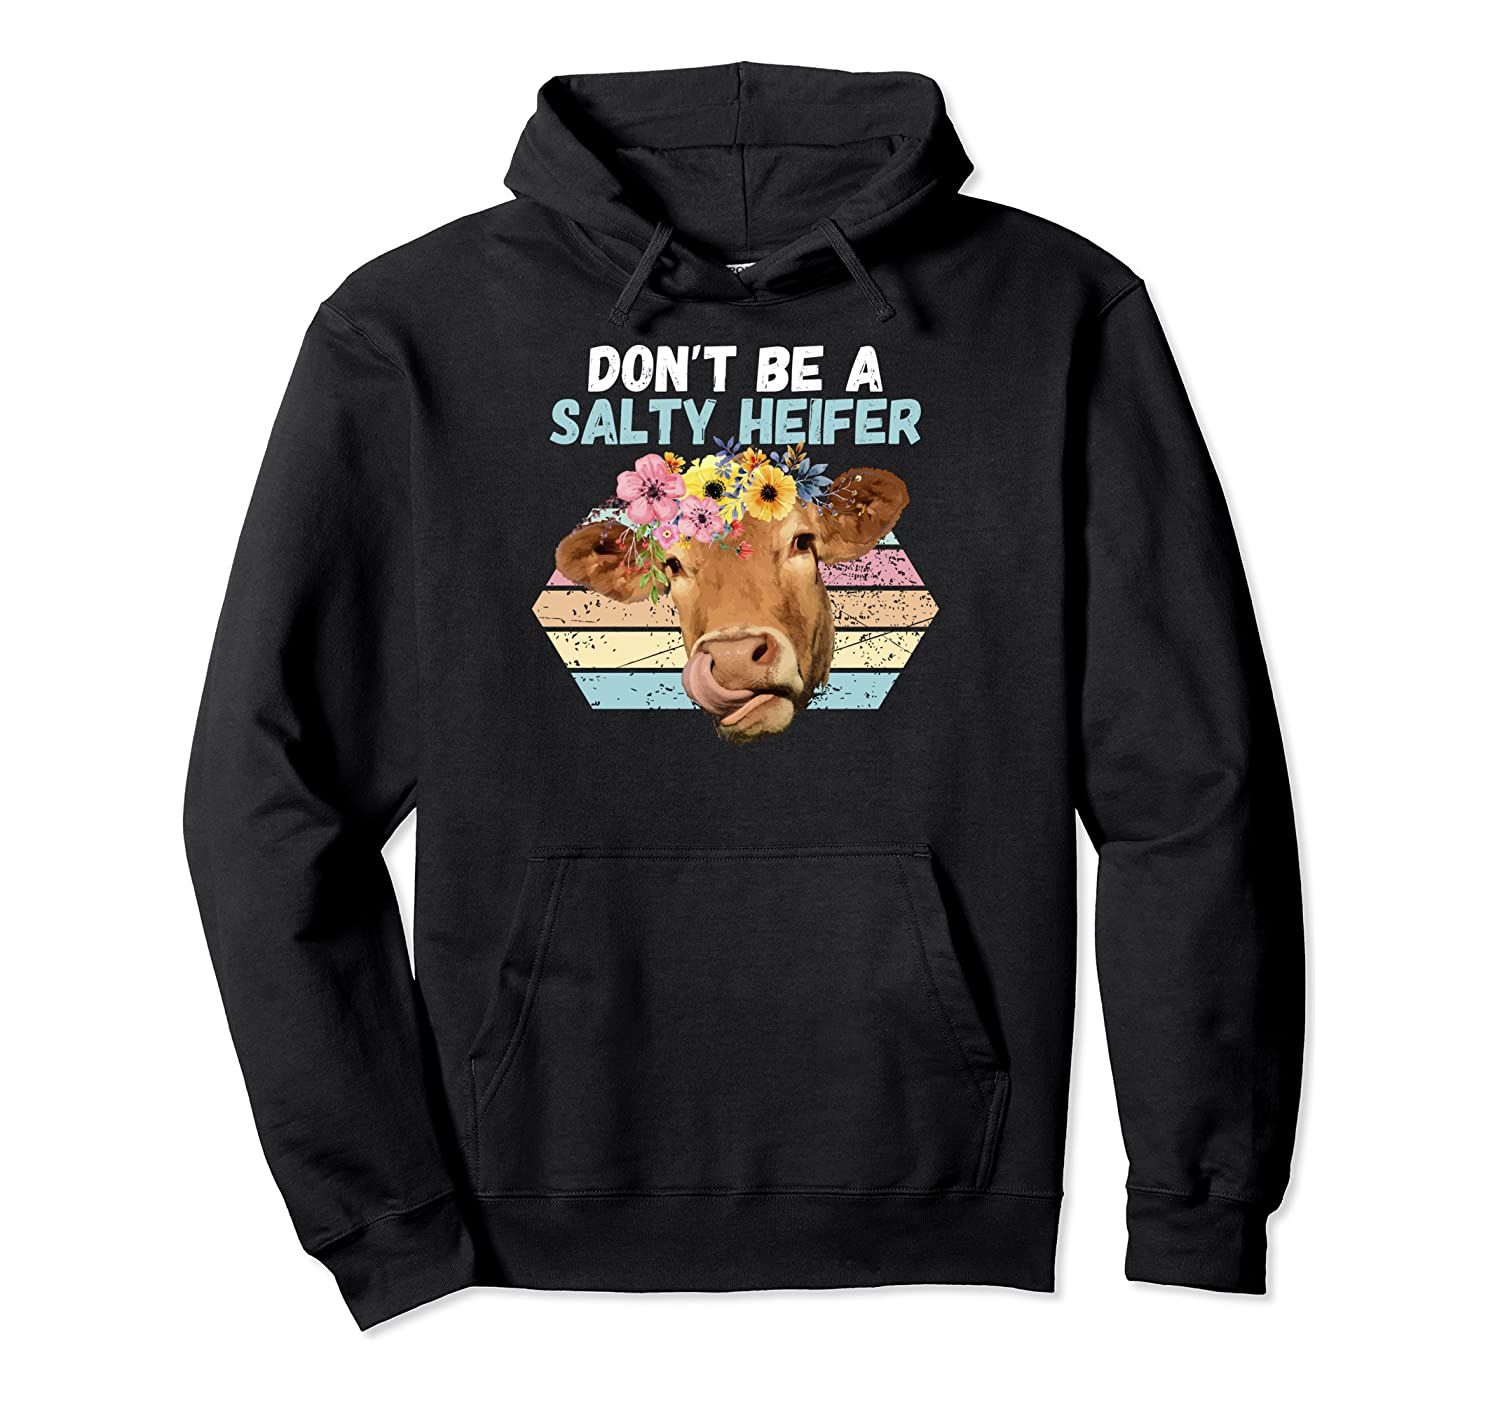 Vintage Farm Humour Don’t Be A Salty Heifer Gift Idea Pullover Hoodie, T-Shirt, Sweatshirt